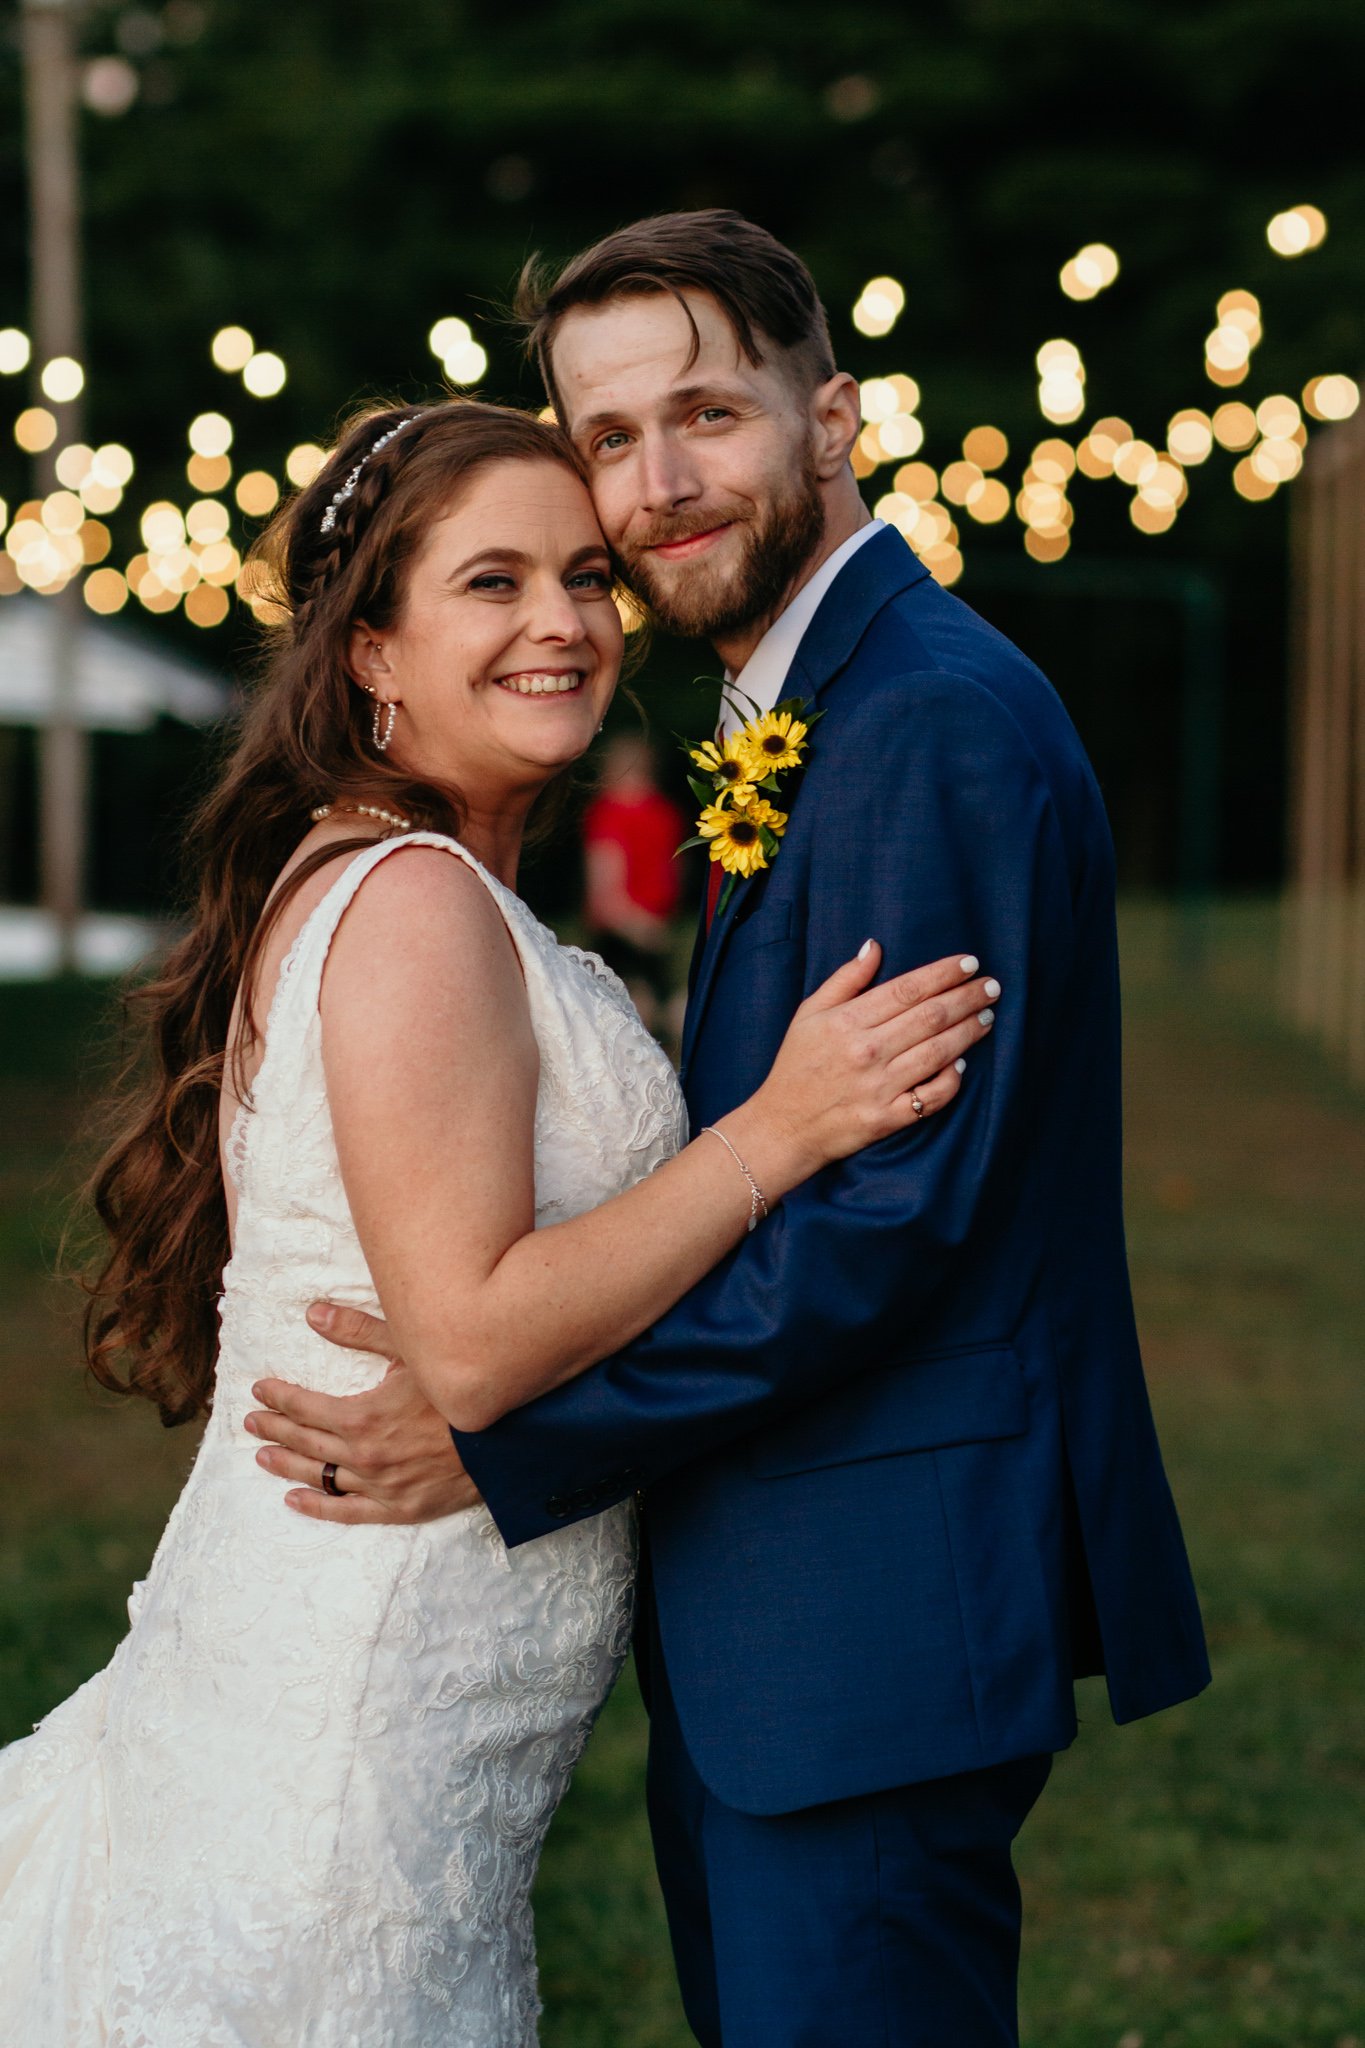 A bride and groom with twinkle lights.